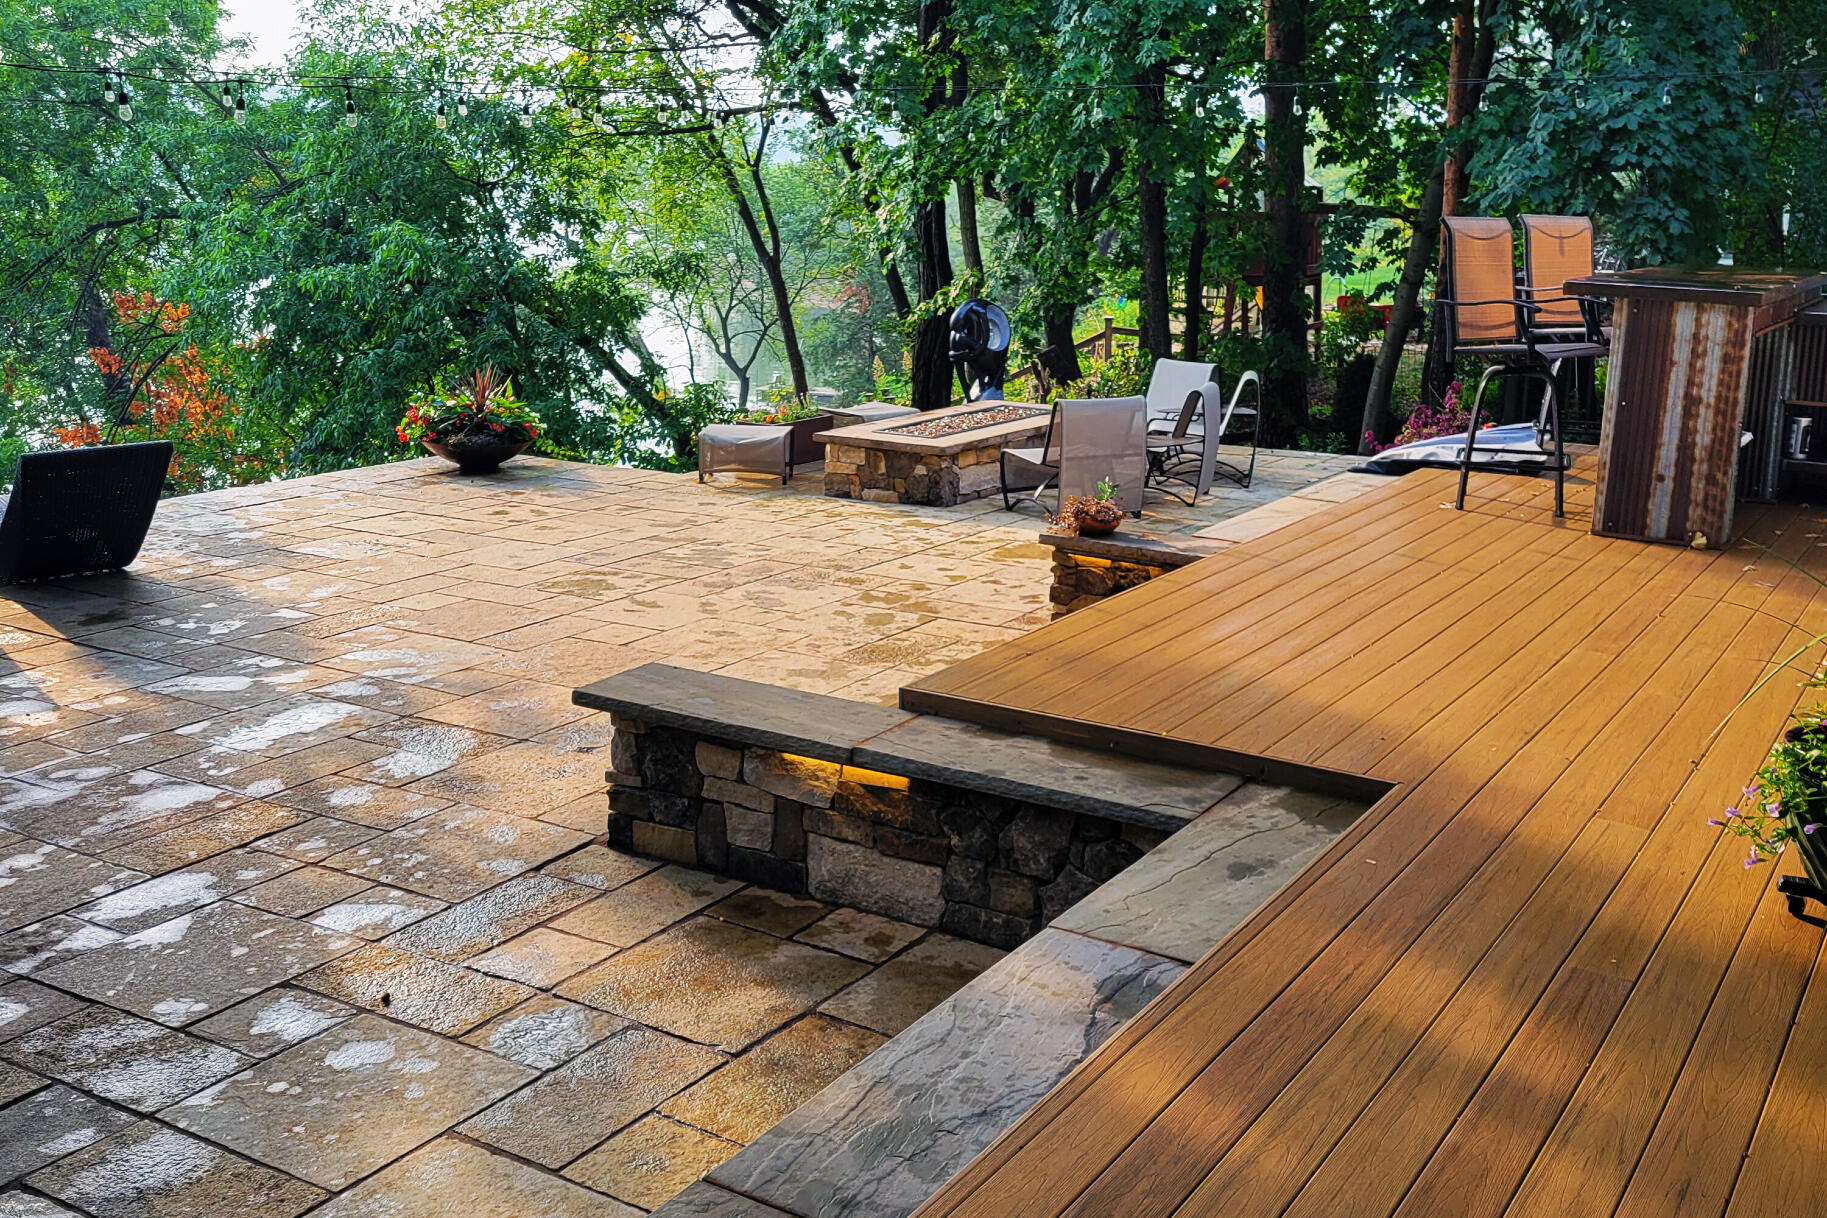 Outdoor wood deck with paver patio overlooking rivers bluffs